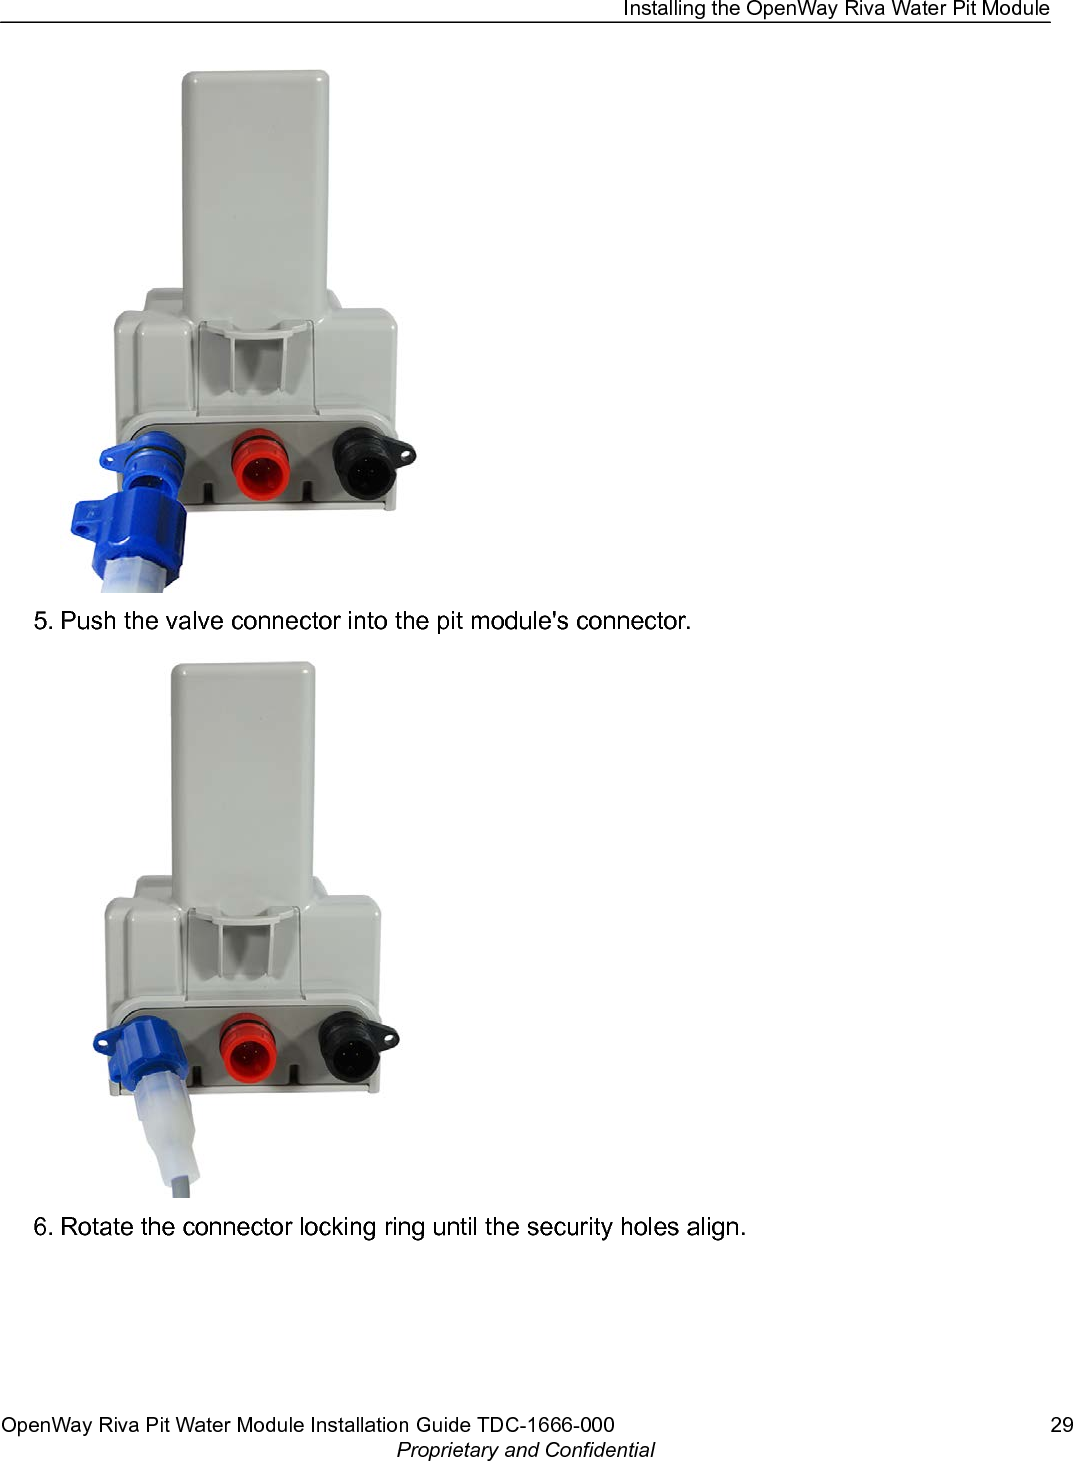 5. Push the valve connector into the pit module&apos;s connector.6. Rotate the connector locking ring until the security holes align.Installing the OpenWay Riva Water Pit ModuleOpenWay Riva Pit Water Module Installation Guide TDC-1666-000 29Proprietary and Confidential